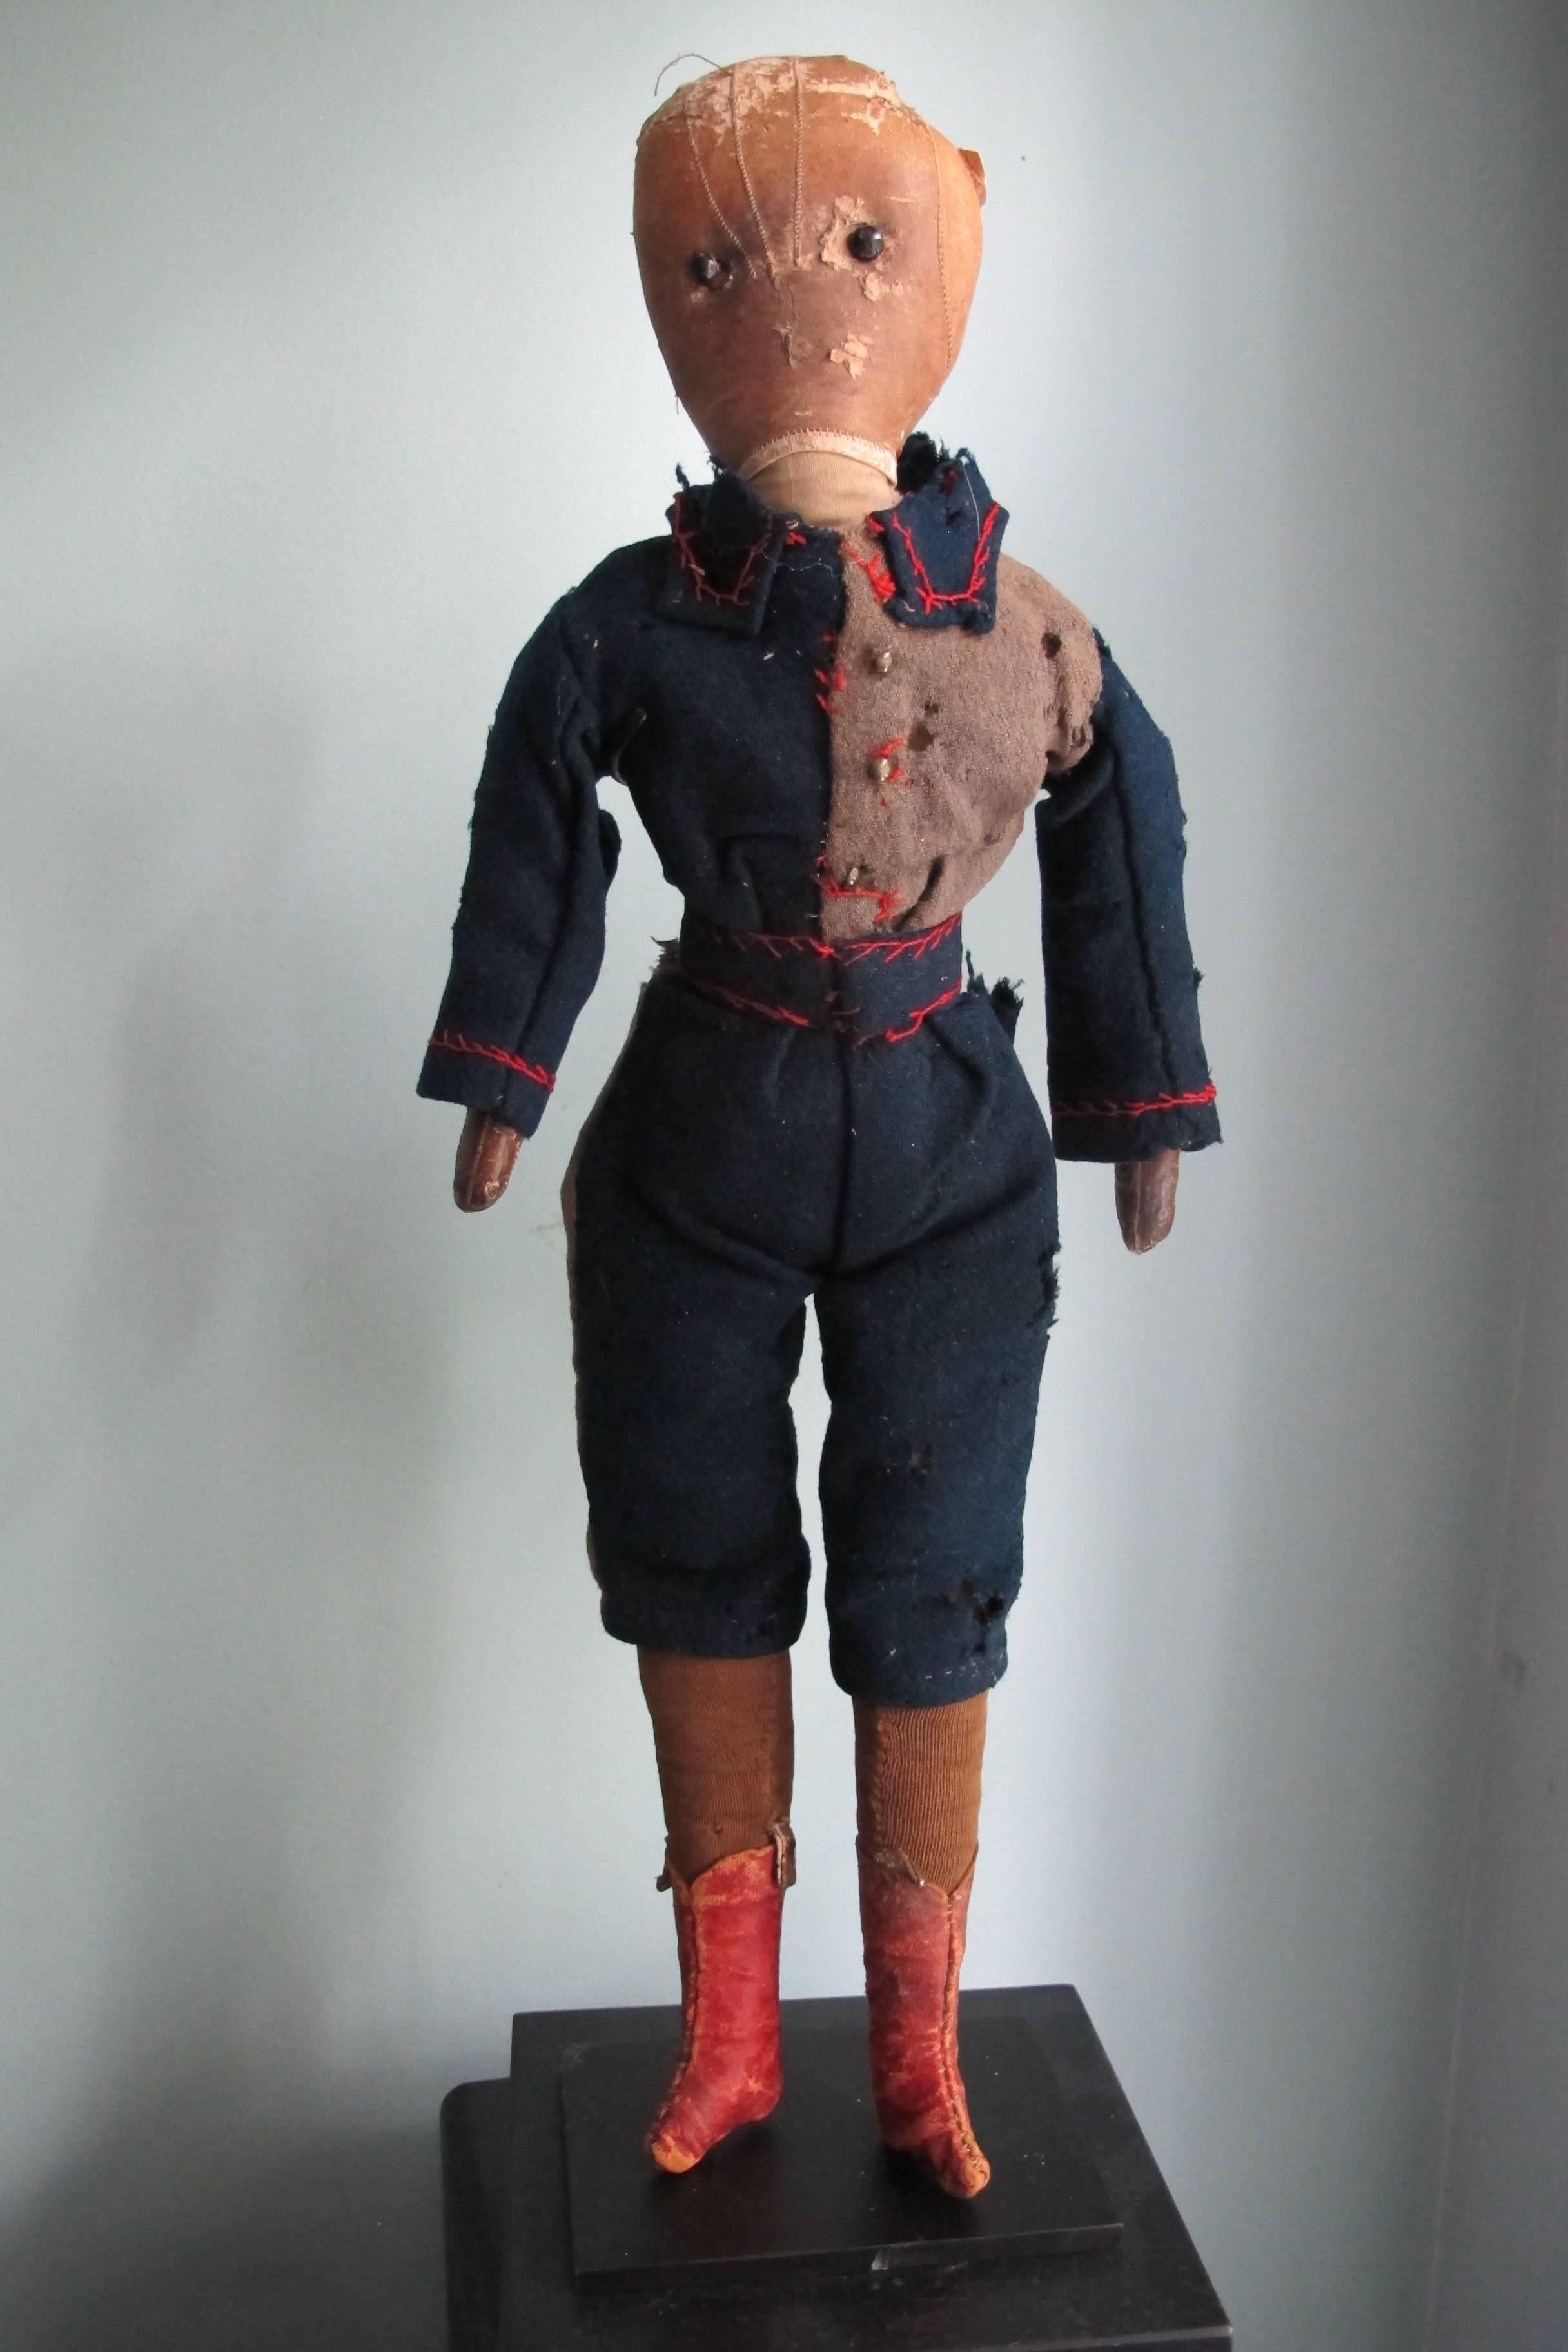 An early boys doll with fancy pants and jacket with head made for a stitched leather child's glove and red leather boots. The eyes are applied black shoe buttons. The doll came with a yellowed paper note , 